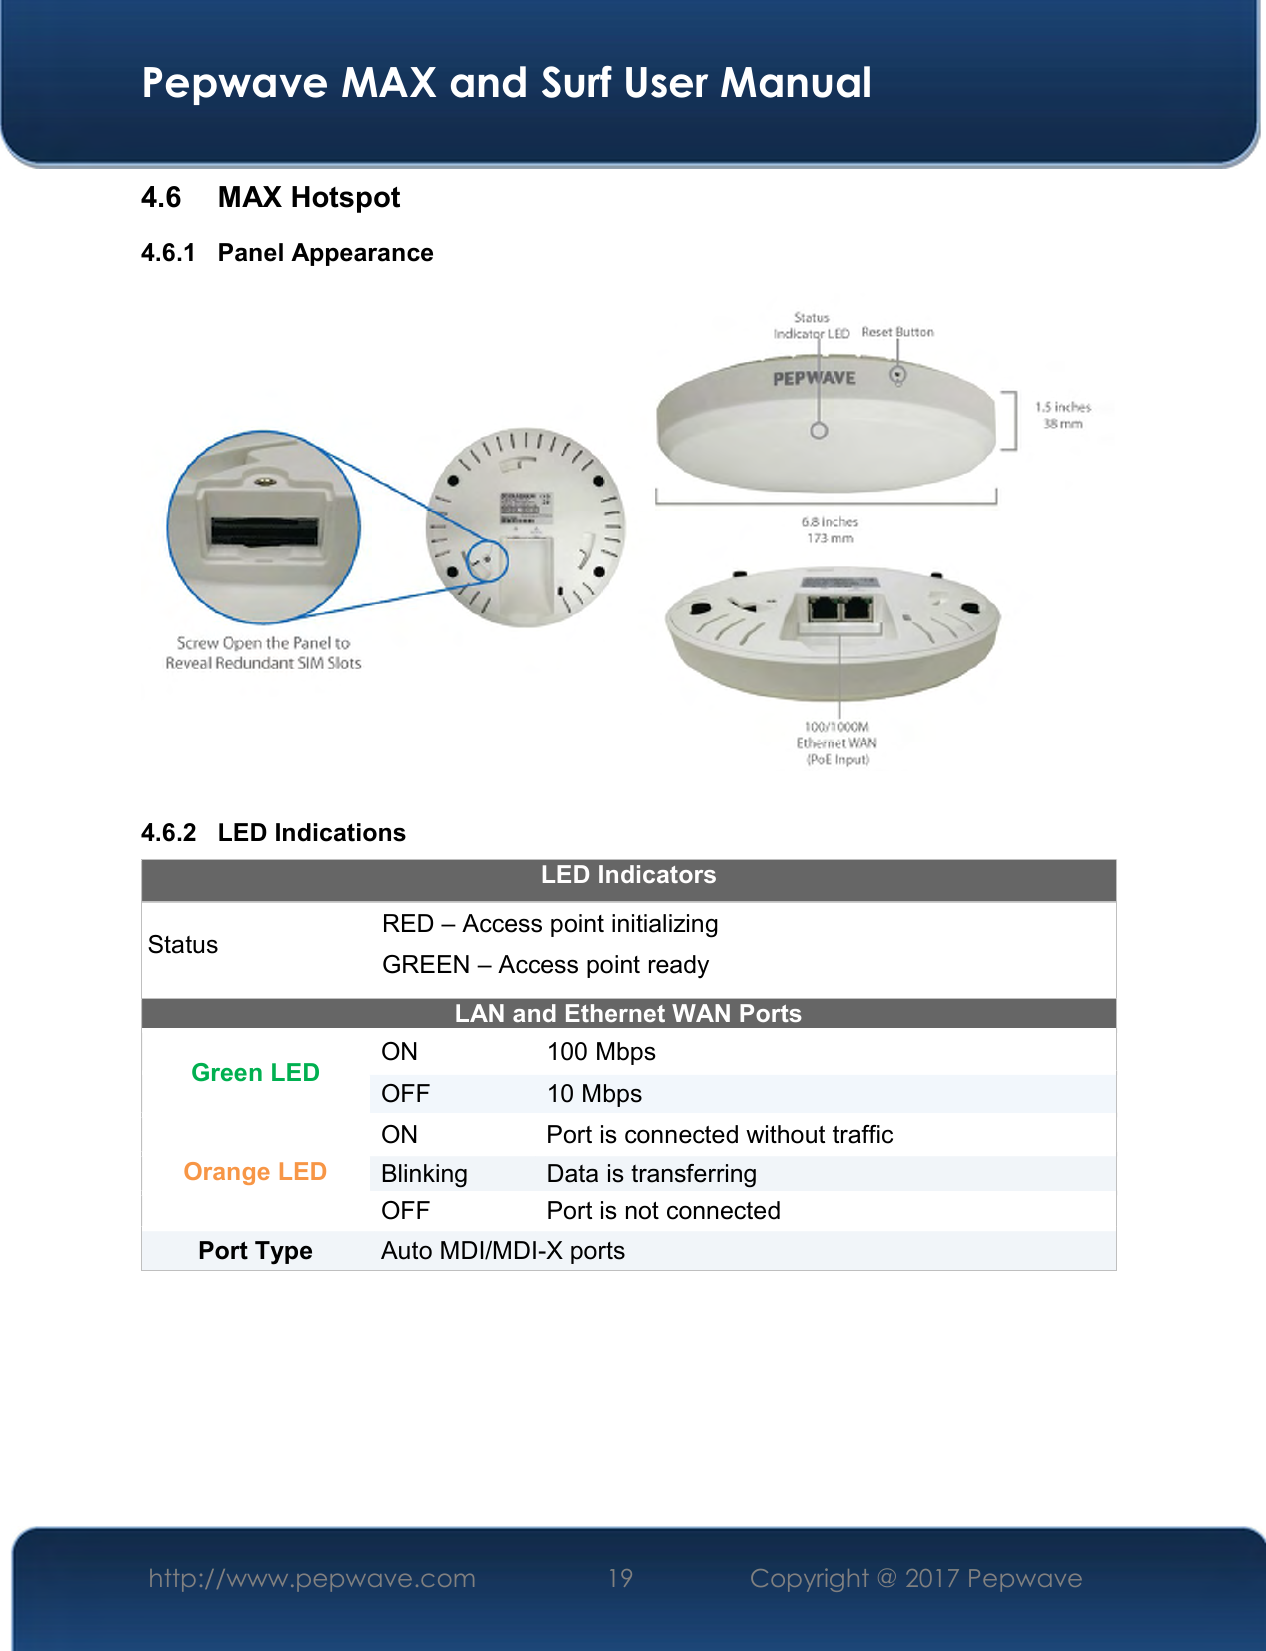  Pepwave MAX and Surf User Manual http://www.pepwave.com  19    Copyright @ 2017 Pepwave   4.6  MAX Hotspot 4.6.1  Panel Appearance   4.6.2  LED Indications LED Indicators Status  RED – Access point initializing GREEN – Access point ready LAN and Ethernet WAN Ports  Green LED  ON  100 Mbps OFF  10 Mbps Orange LED ON  Port is connected without traffic Blinking  Data is transferring OFF  Port is not connected Port Type   Auto MDI/MDI-X ports     